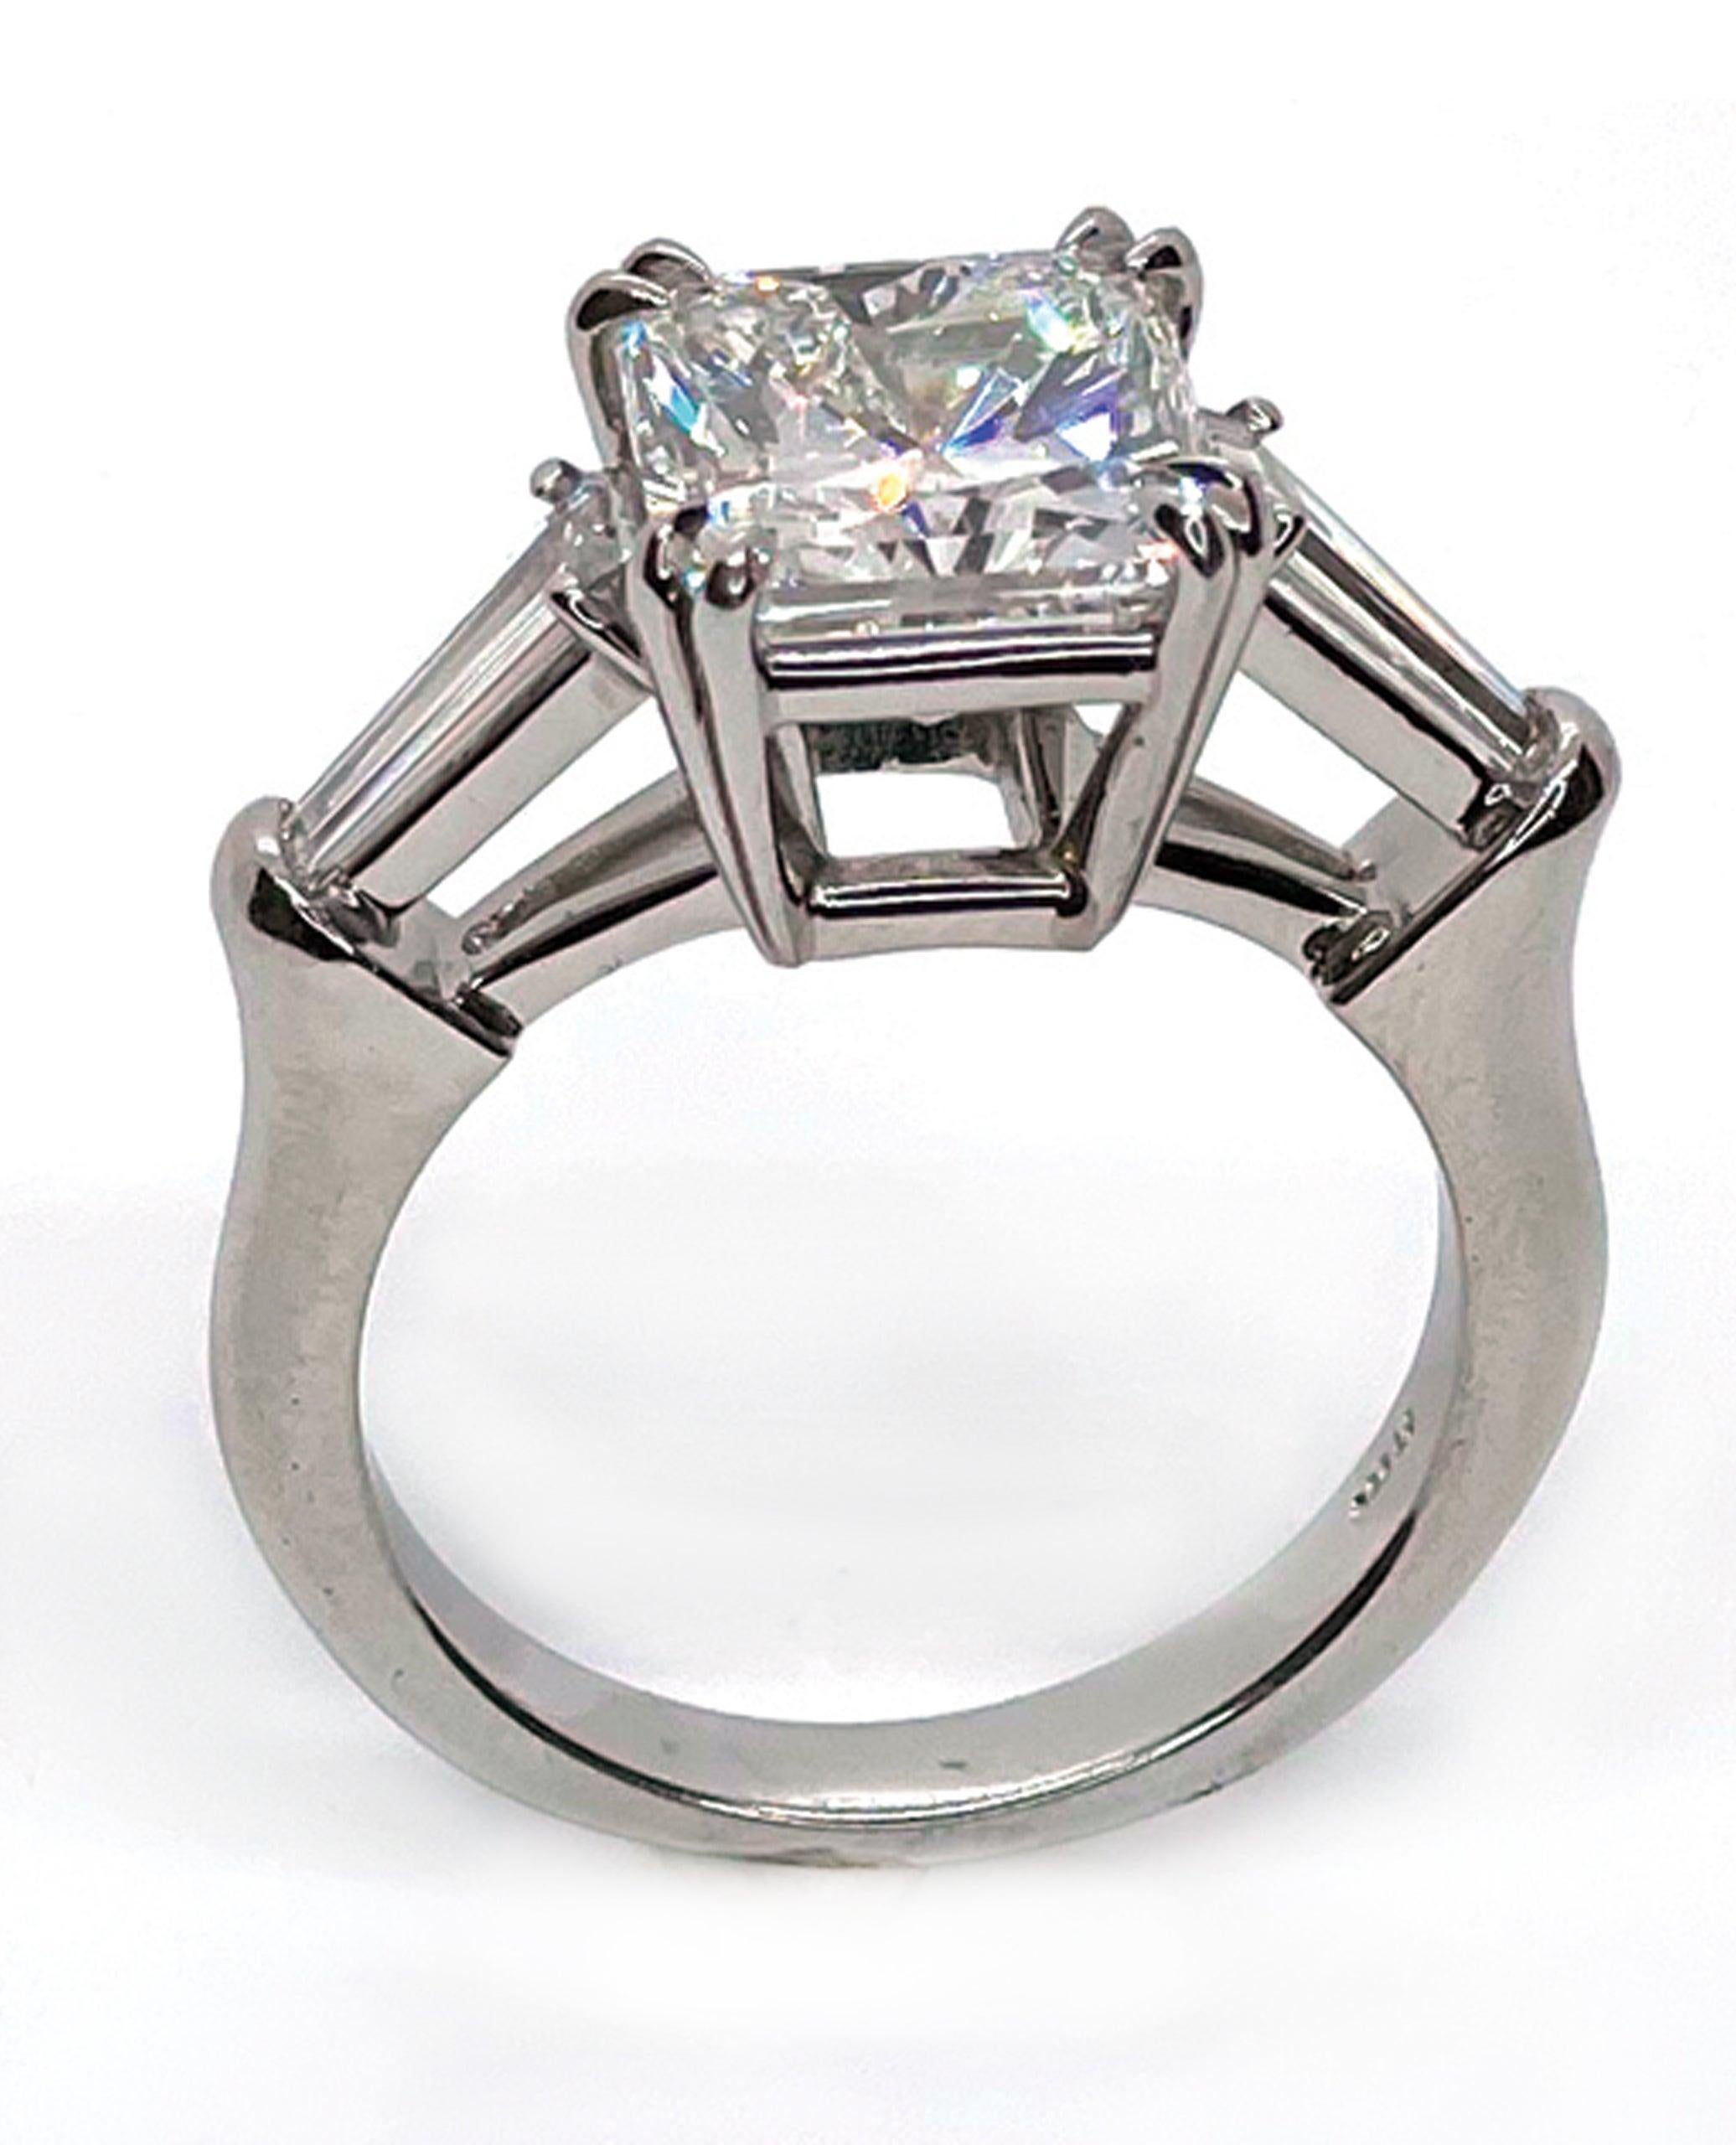 Platinum hand made three stone ring with two tapered baguette diamonds totaling 0.56 carats (G color / VS clarity) and one center GIA certified radiant cut diamond totaling 4.02 carats (I color / VS1 clarity).

-Size 7
-GIA Report No.: 13778088